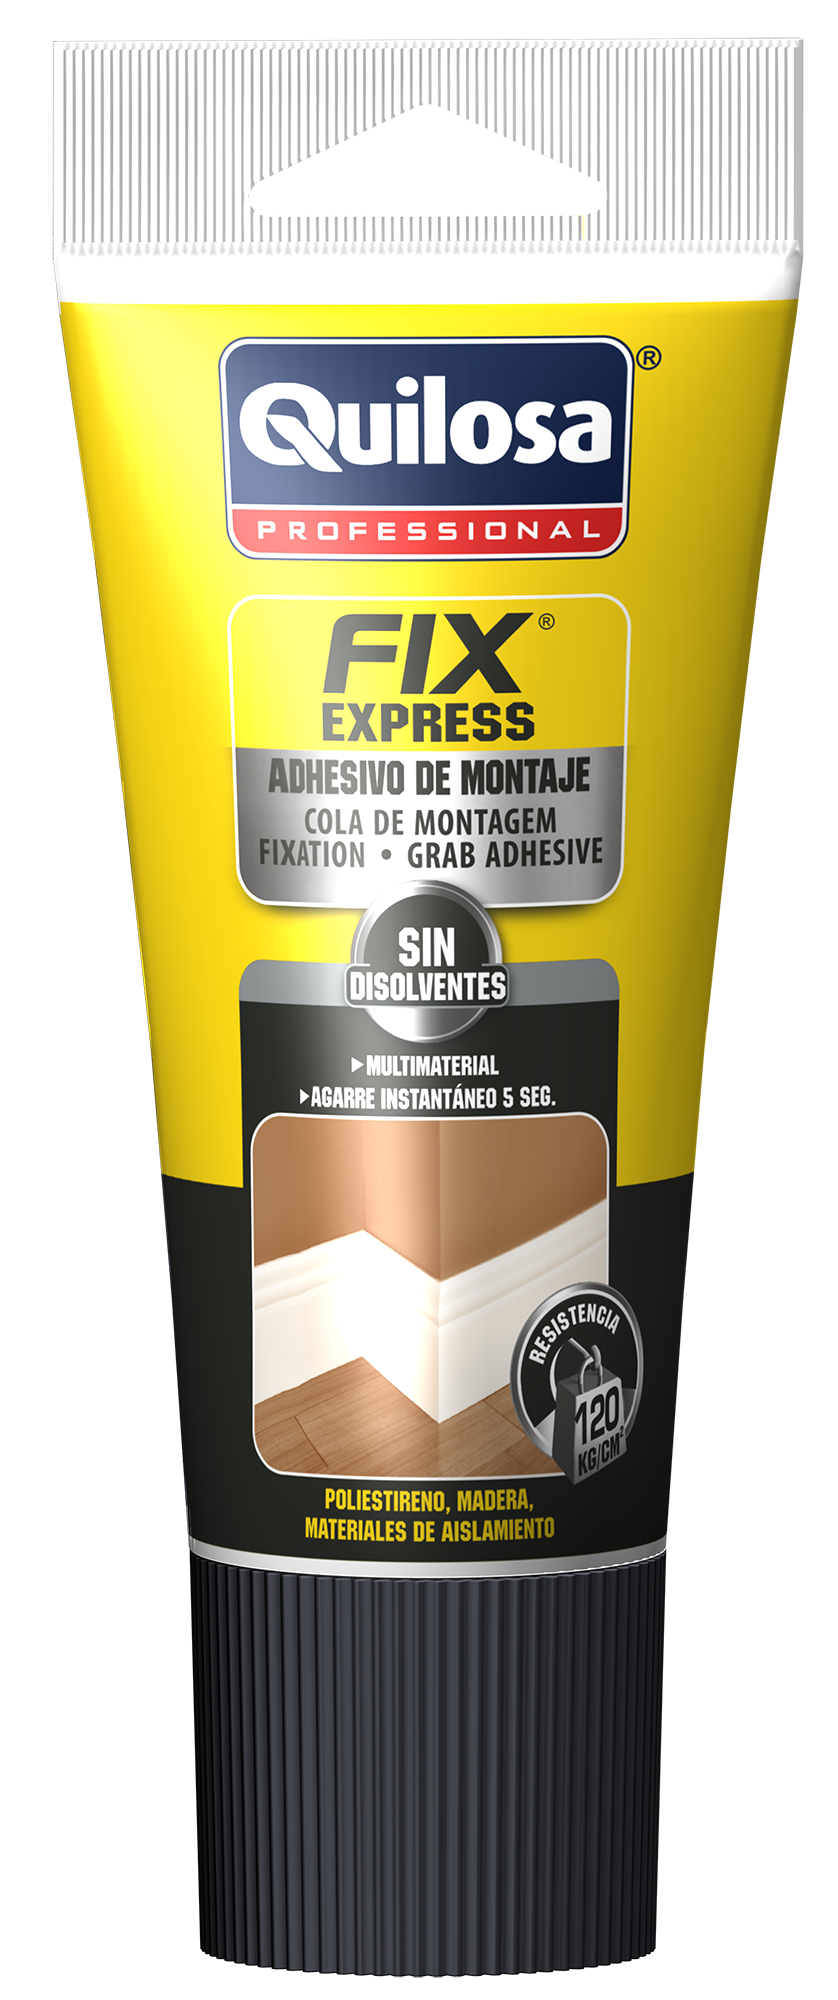 FIX Express Mounting Adhesive - Quilosa